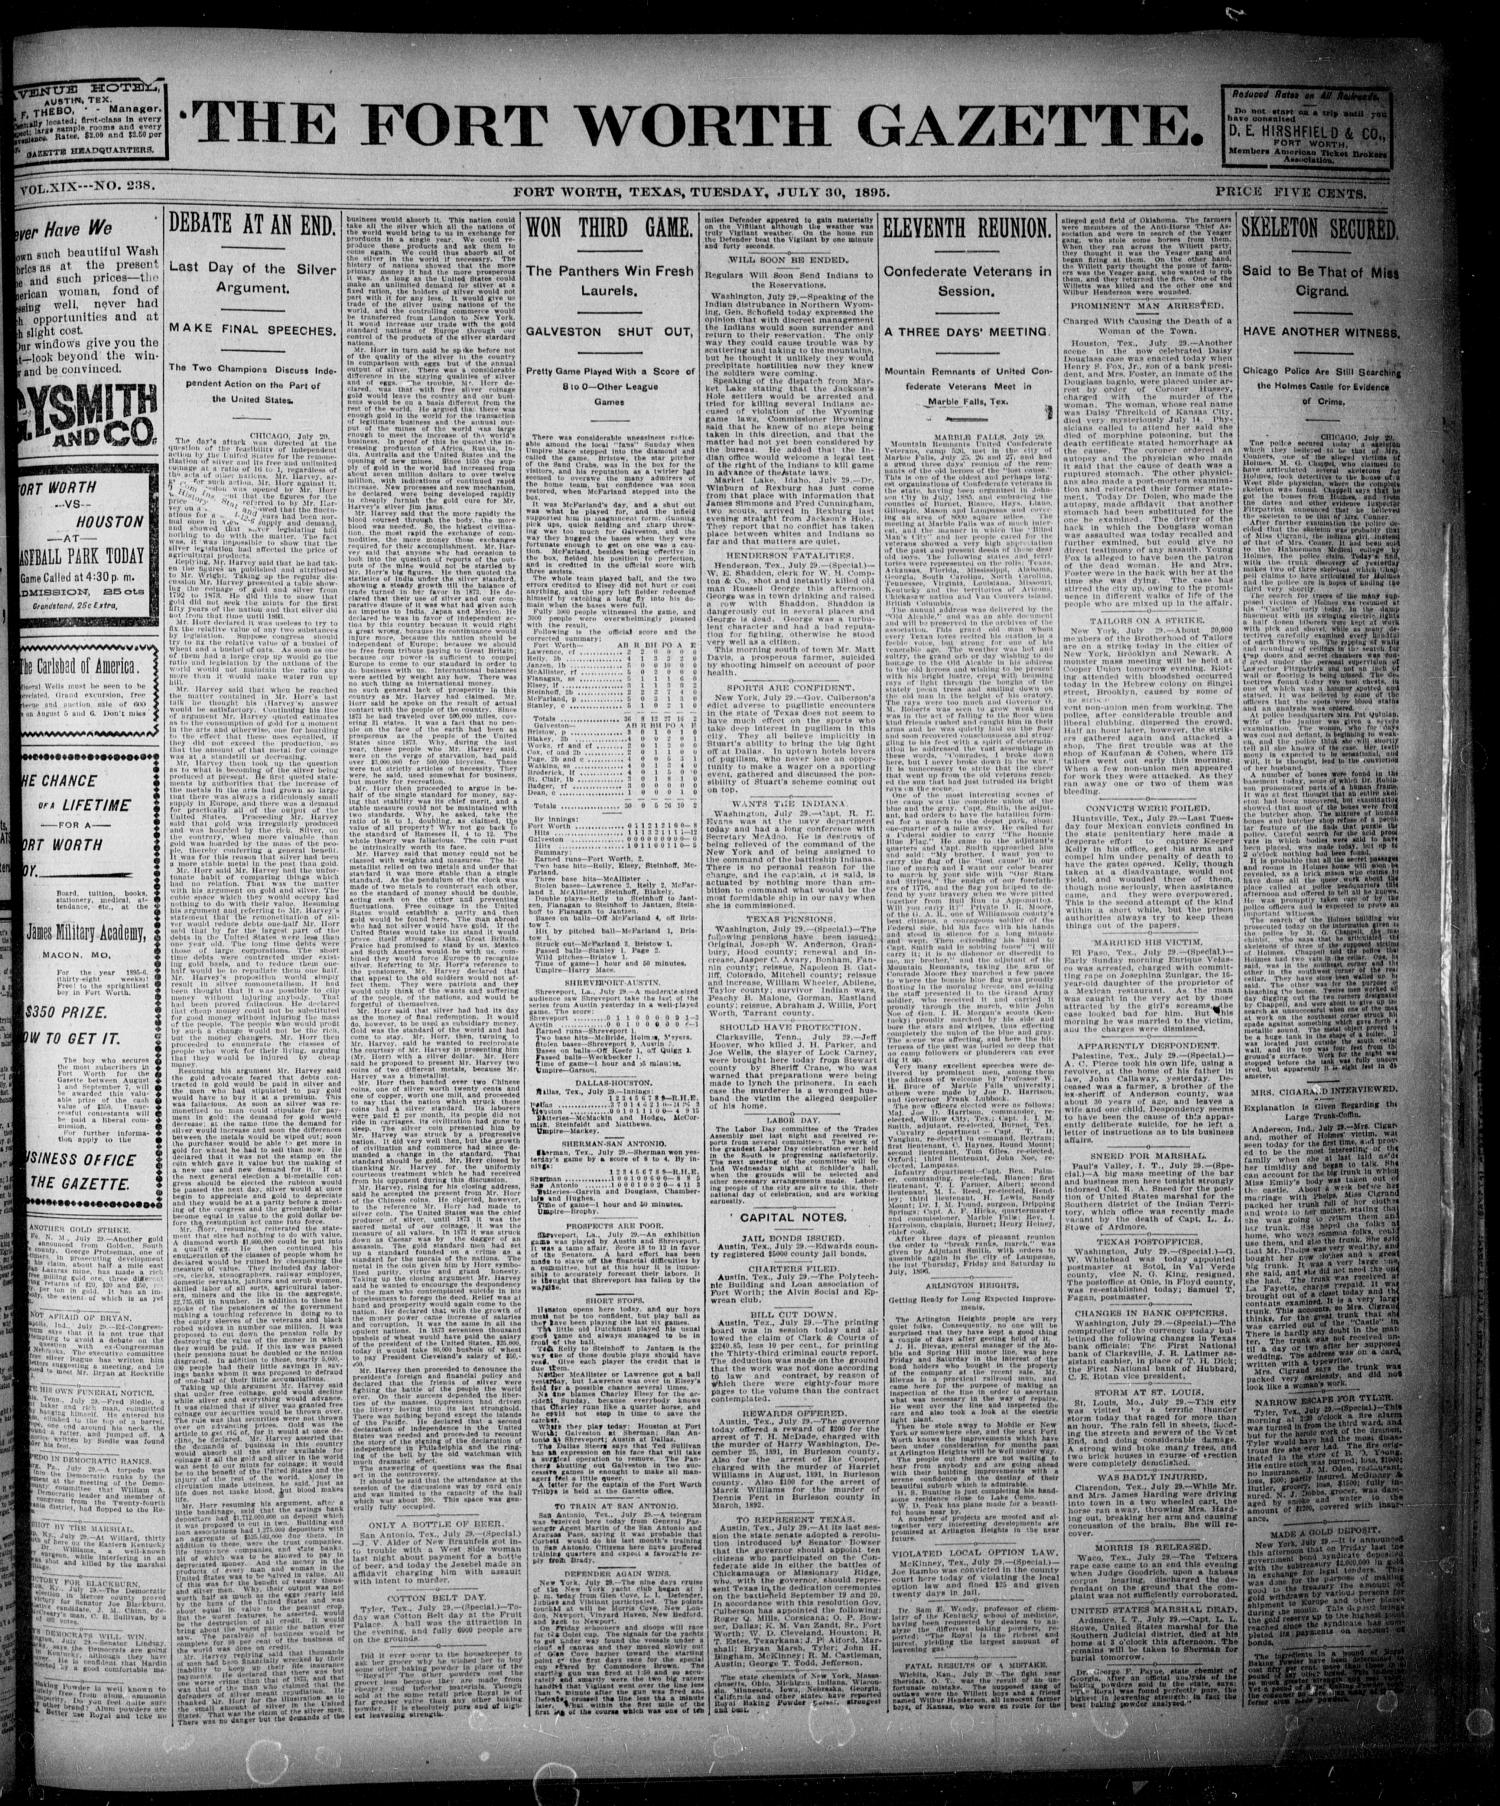 Fort Worth Gazette. (Fort Worth, Vol. 19, No. 238, Ed. 1, Tuesday, July 1895 - Page 1 4 - The Portal to Texas History